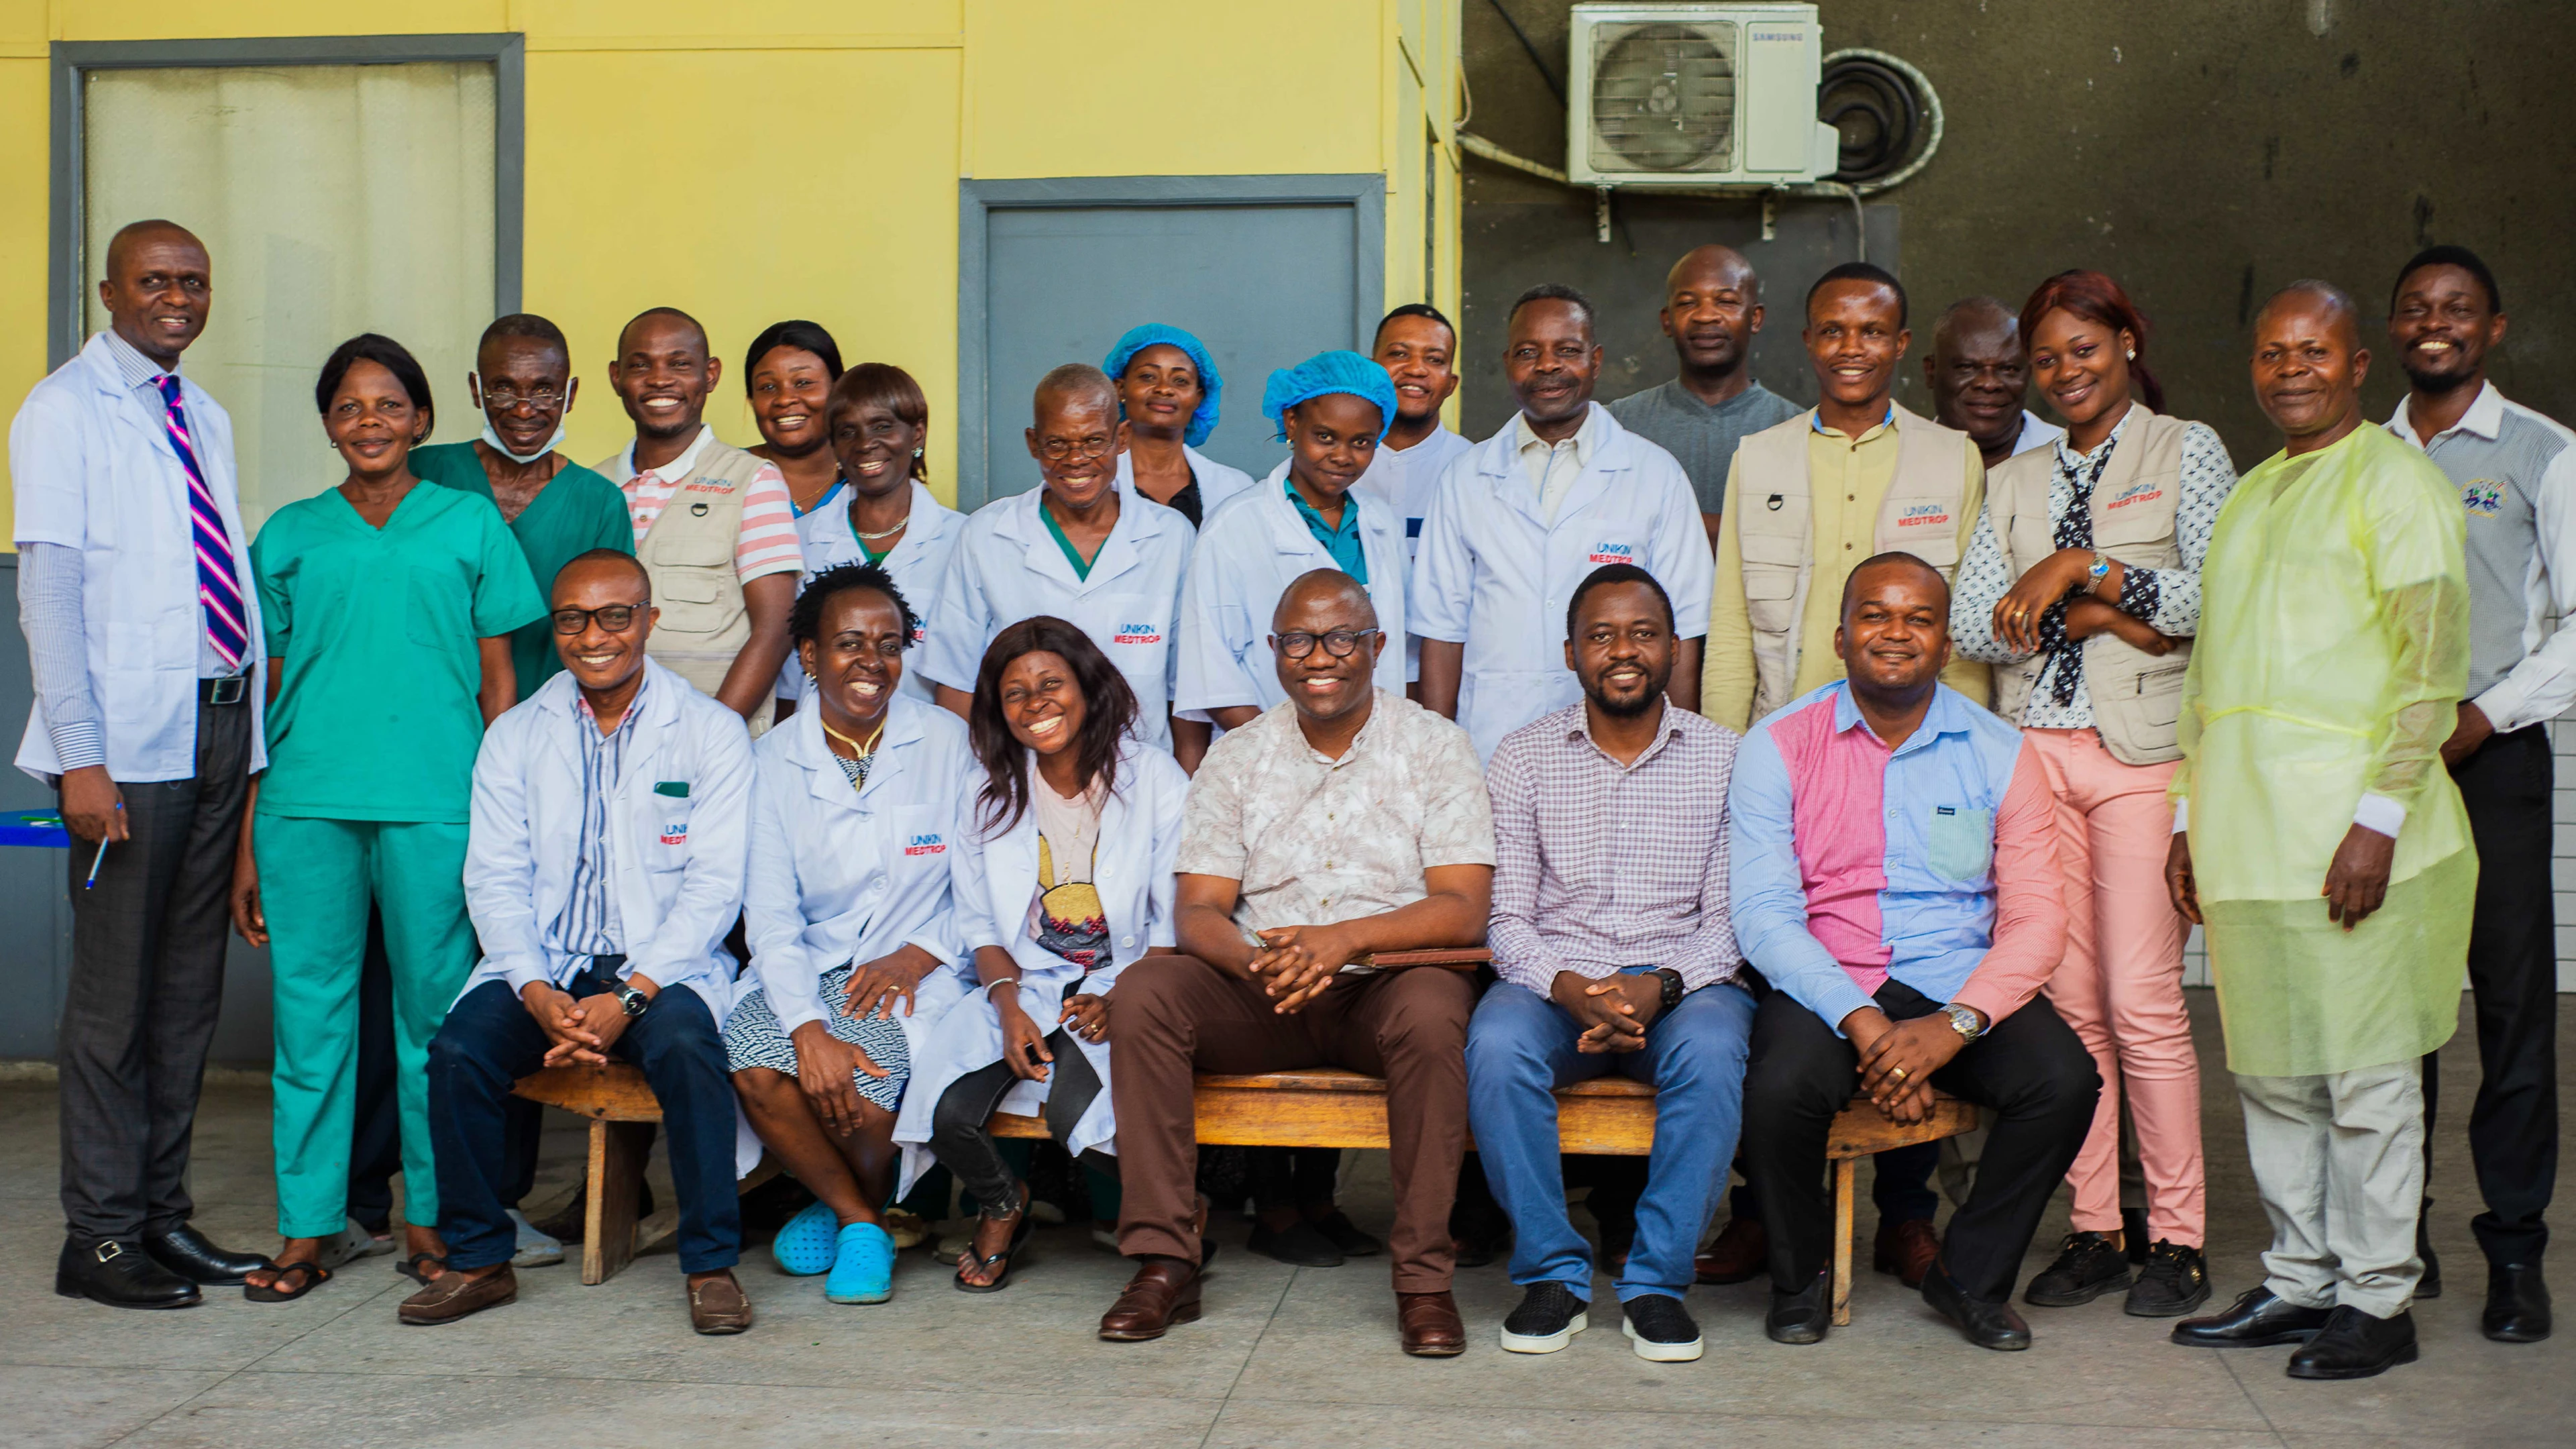 group photo of Hypolite Mavoko's research team looking at the camera and smiling